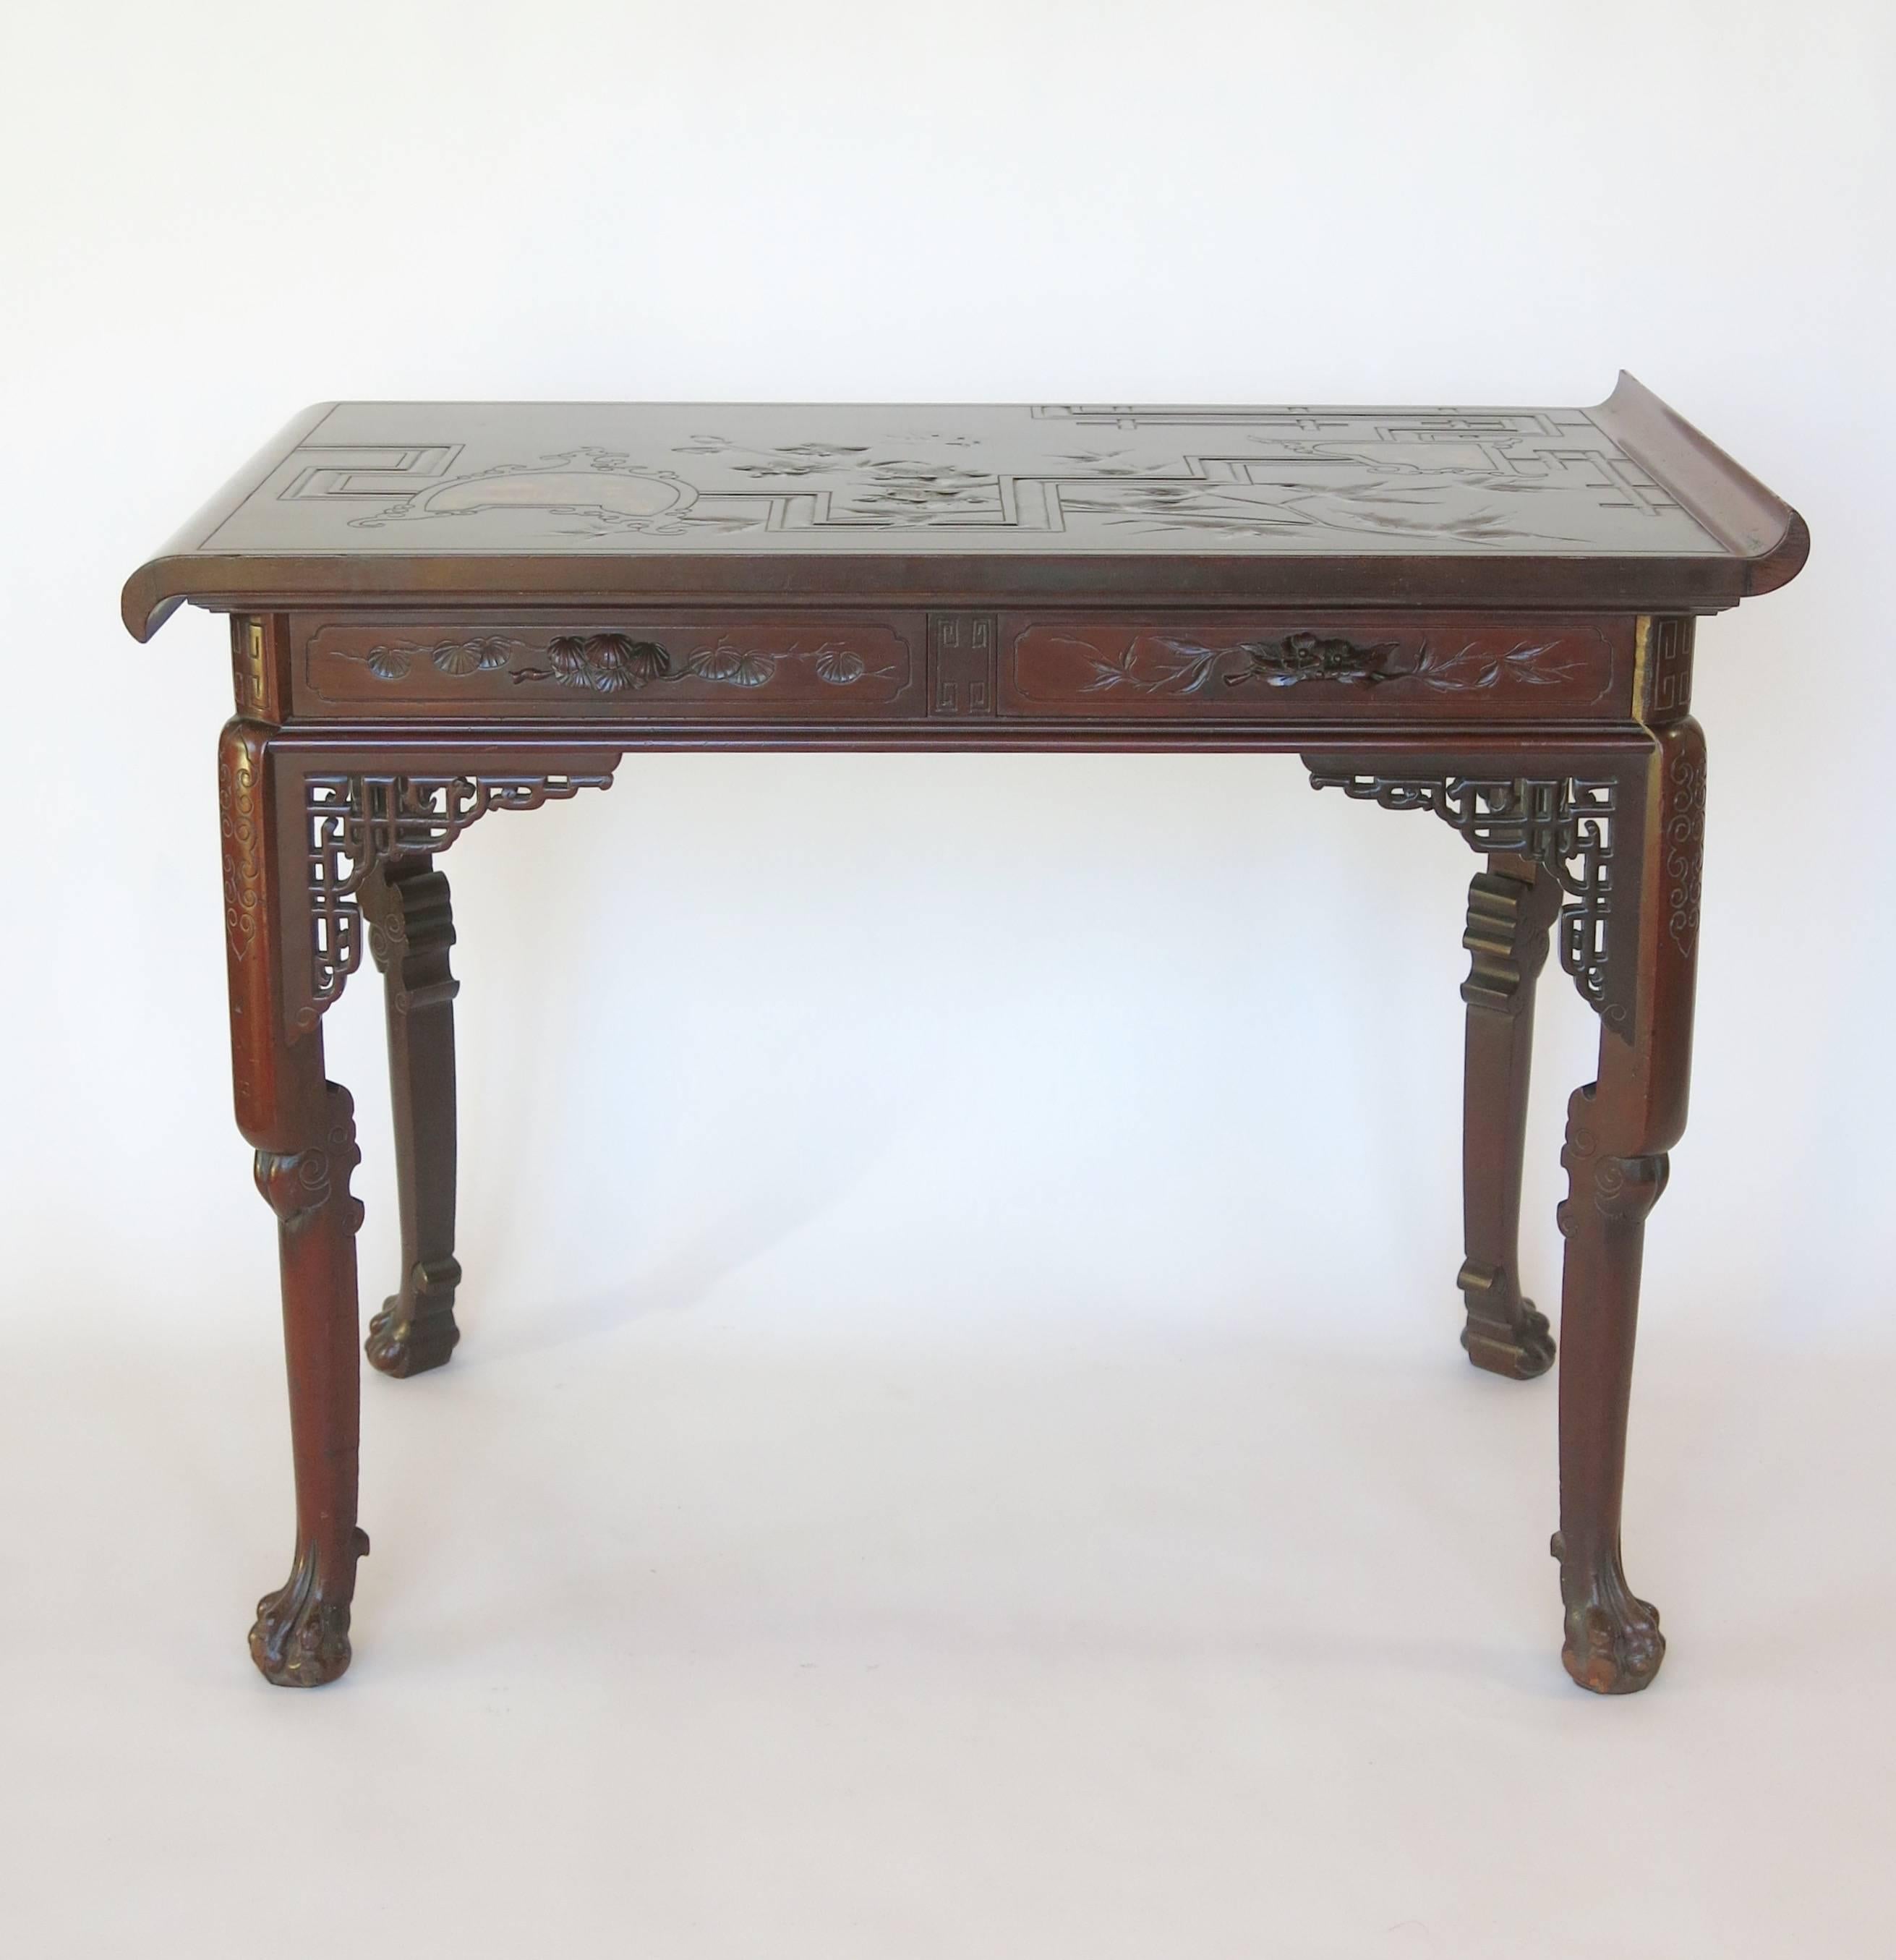 This fine and rare French centre table by Gabriel Viardot is made of rosewood with mother-of-pearl inlay, all in the Japonisme taste that was so popular in Paris in the late 19th century. The top, with up curved and down curved ends is carved with